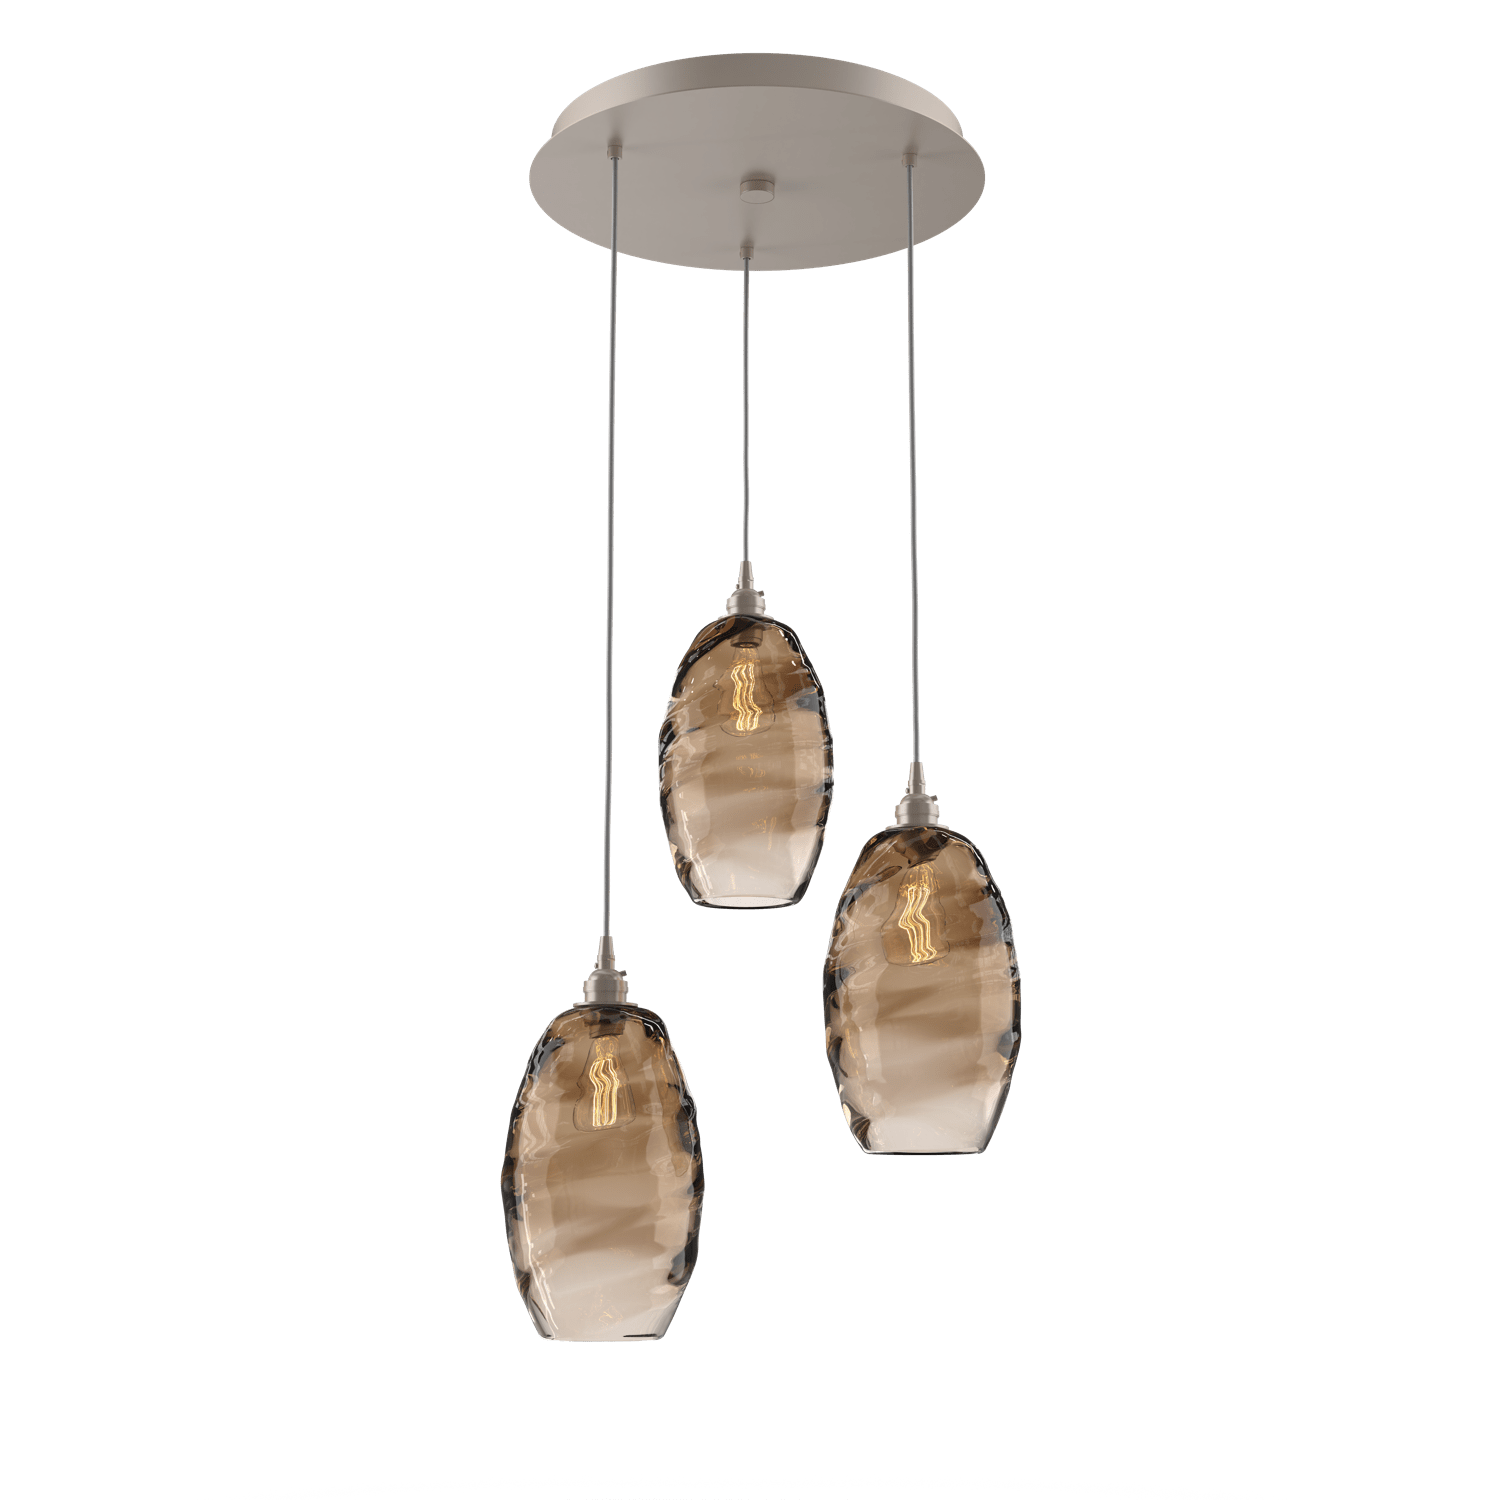 CHB0035-03-BS-OB-Hammerton-Studio-Optic-Blown-Glass-Elisse-3-light-round-pendant-chandelier-with-metallic-beige-silver-finish-and-optic-bronze-blown-glass-shades-and-incandescent-lamping